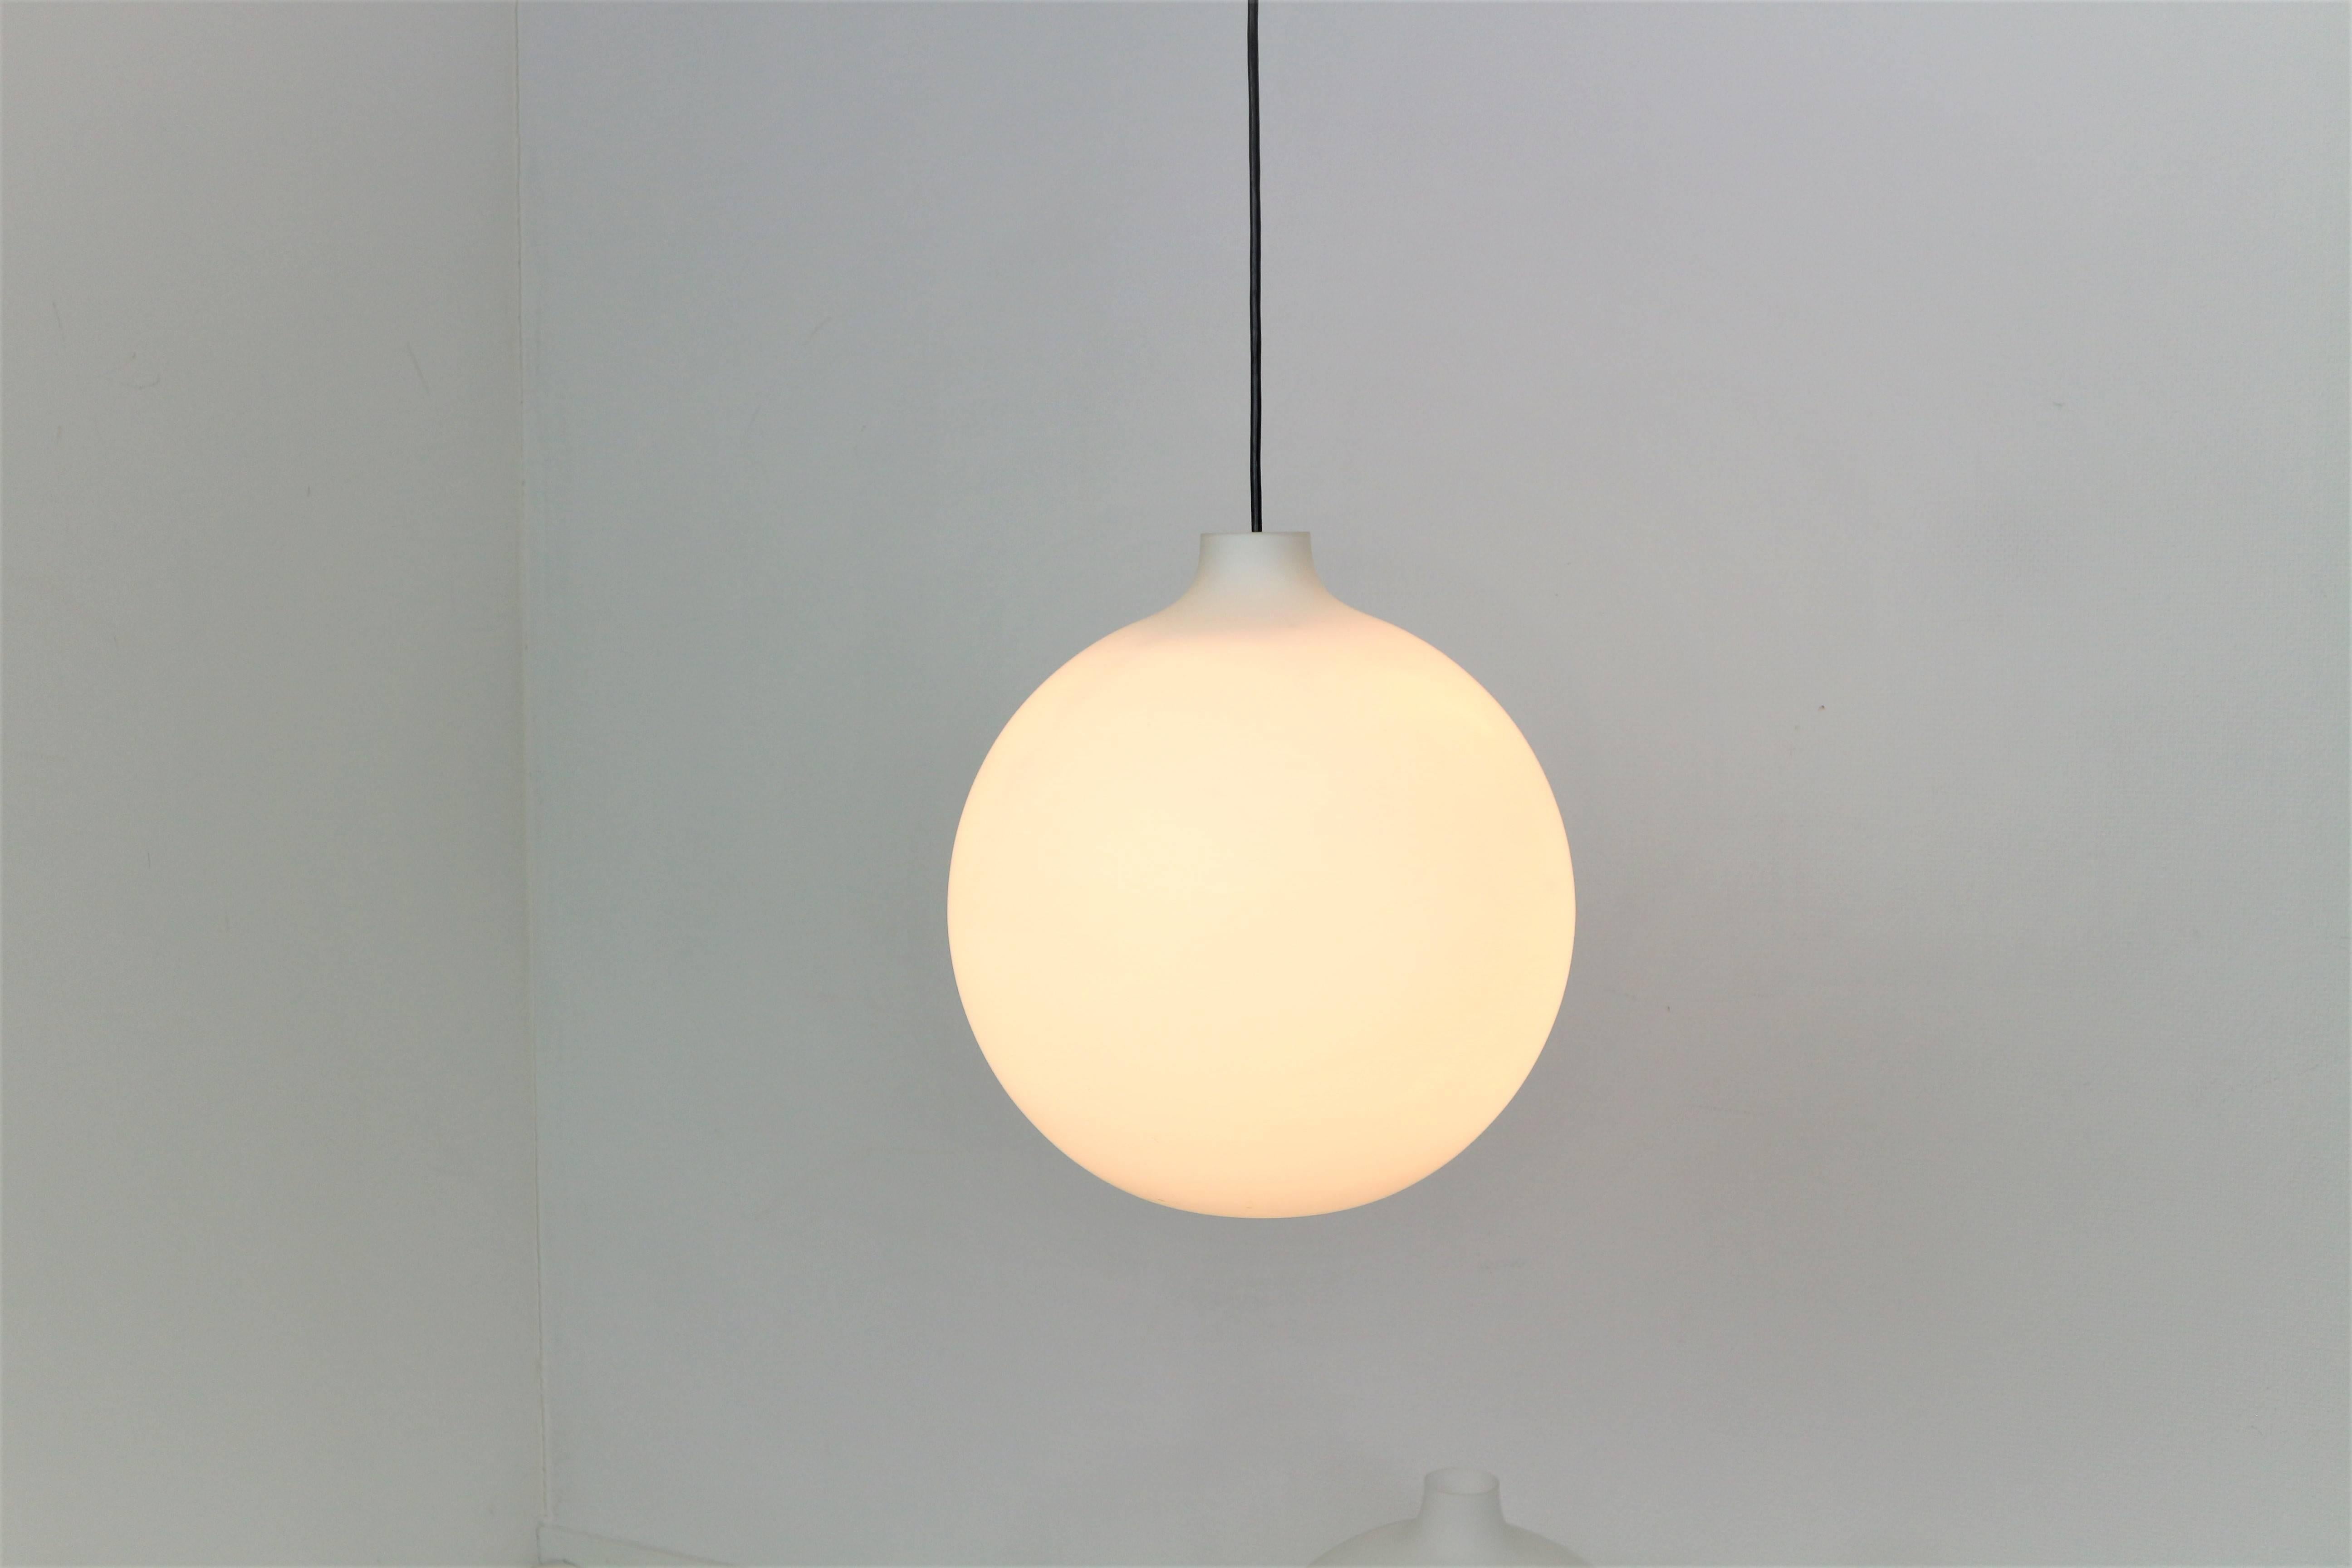 Satellite (also known as the Wohlert) pendant provides uniform, general and diffuse lighting. The opening at the bottom of the glass produces direct light. The glass quality ensures that, visually, the Satellite pendant appears as an evenly lit